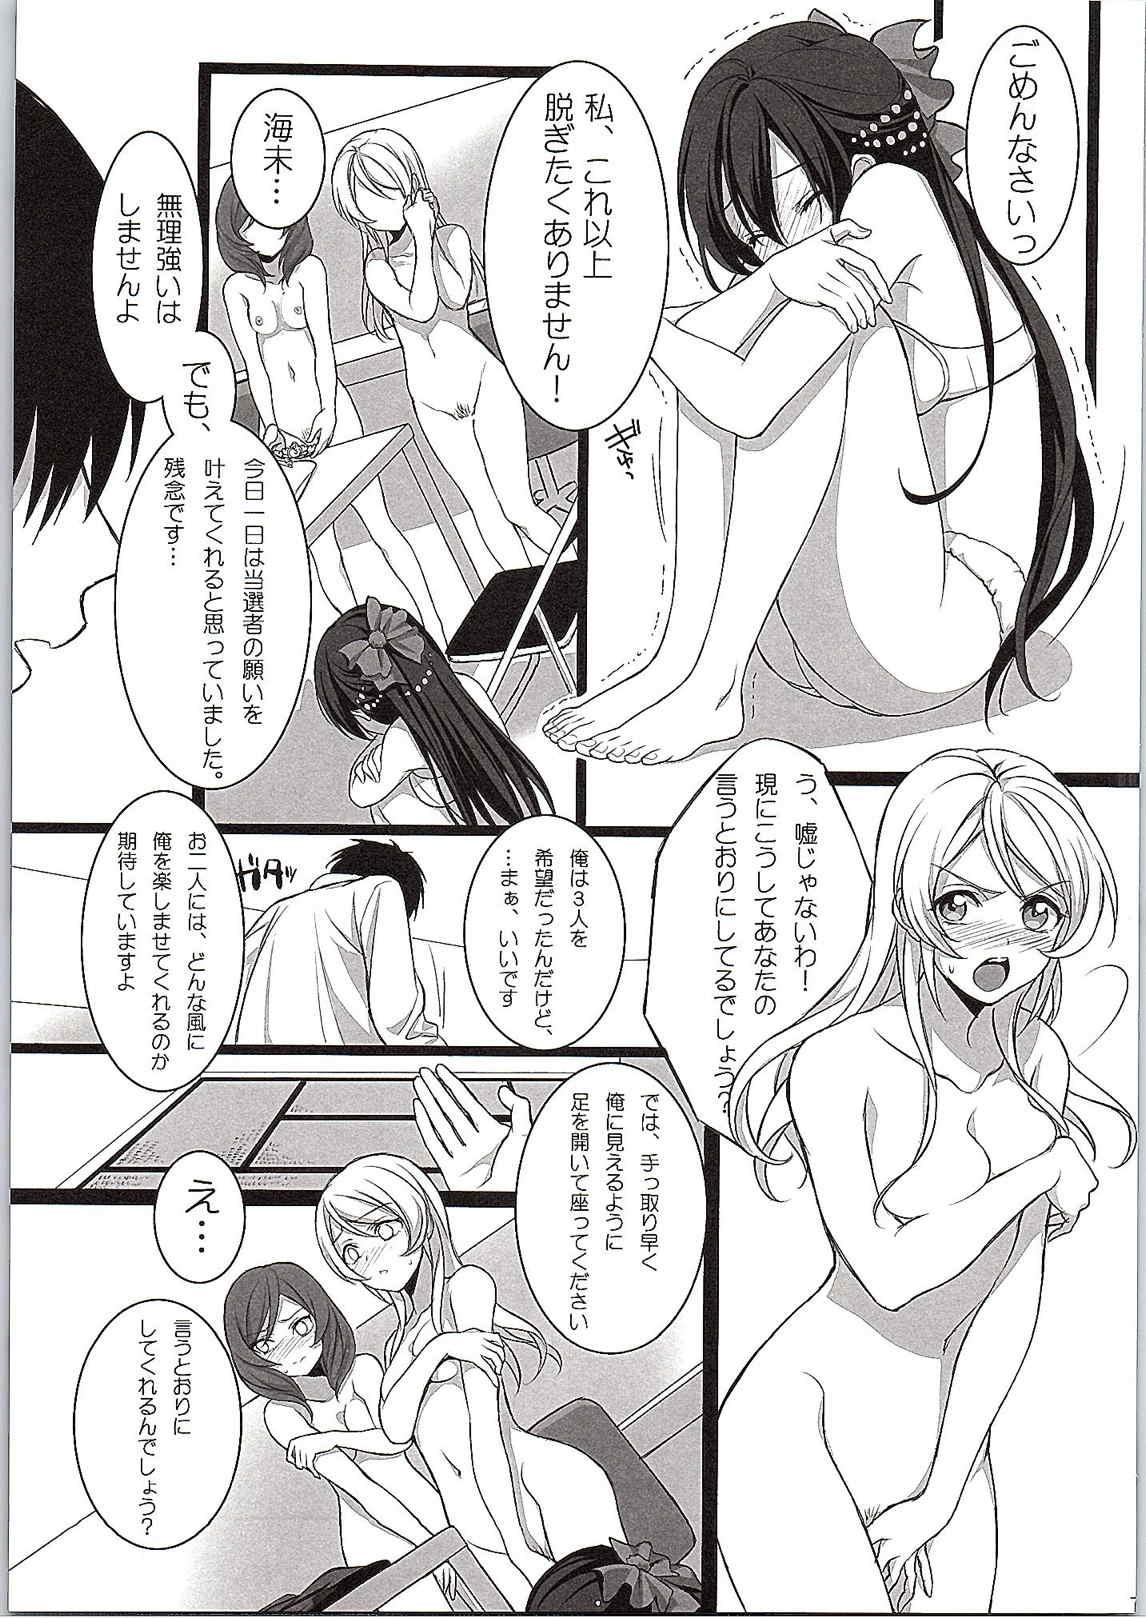 Girls Getting Fucked Target - Love live Massive - Page 6